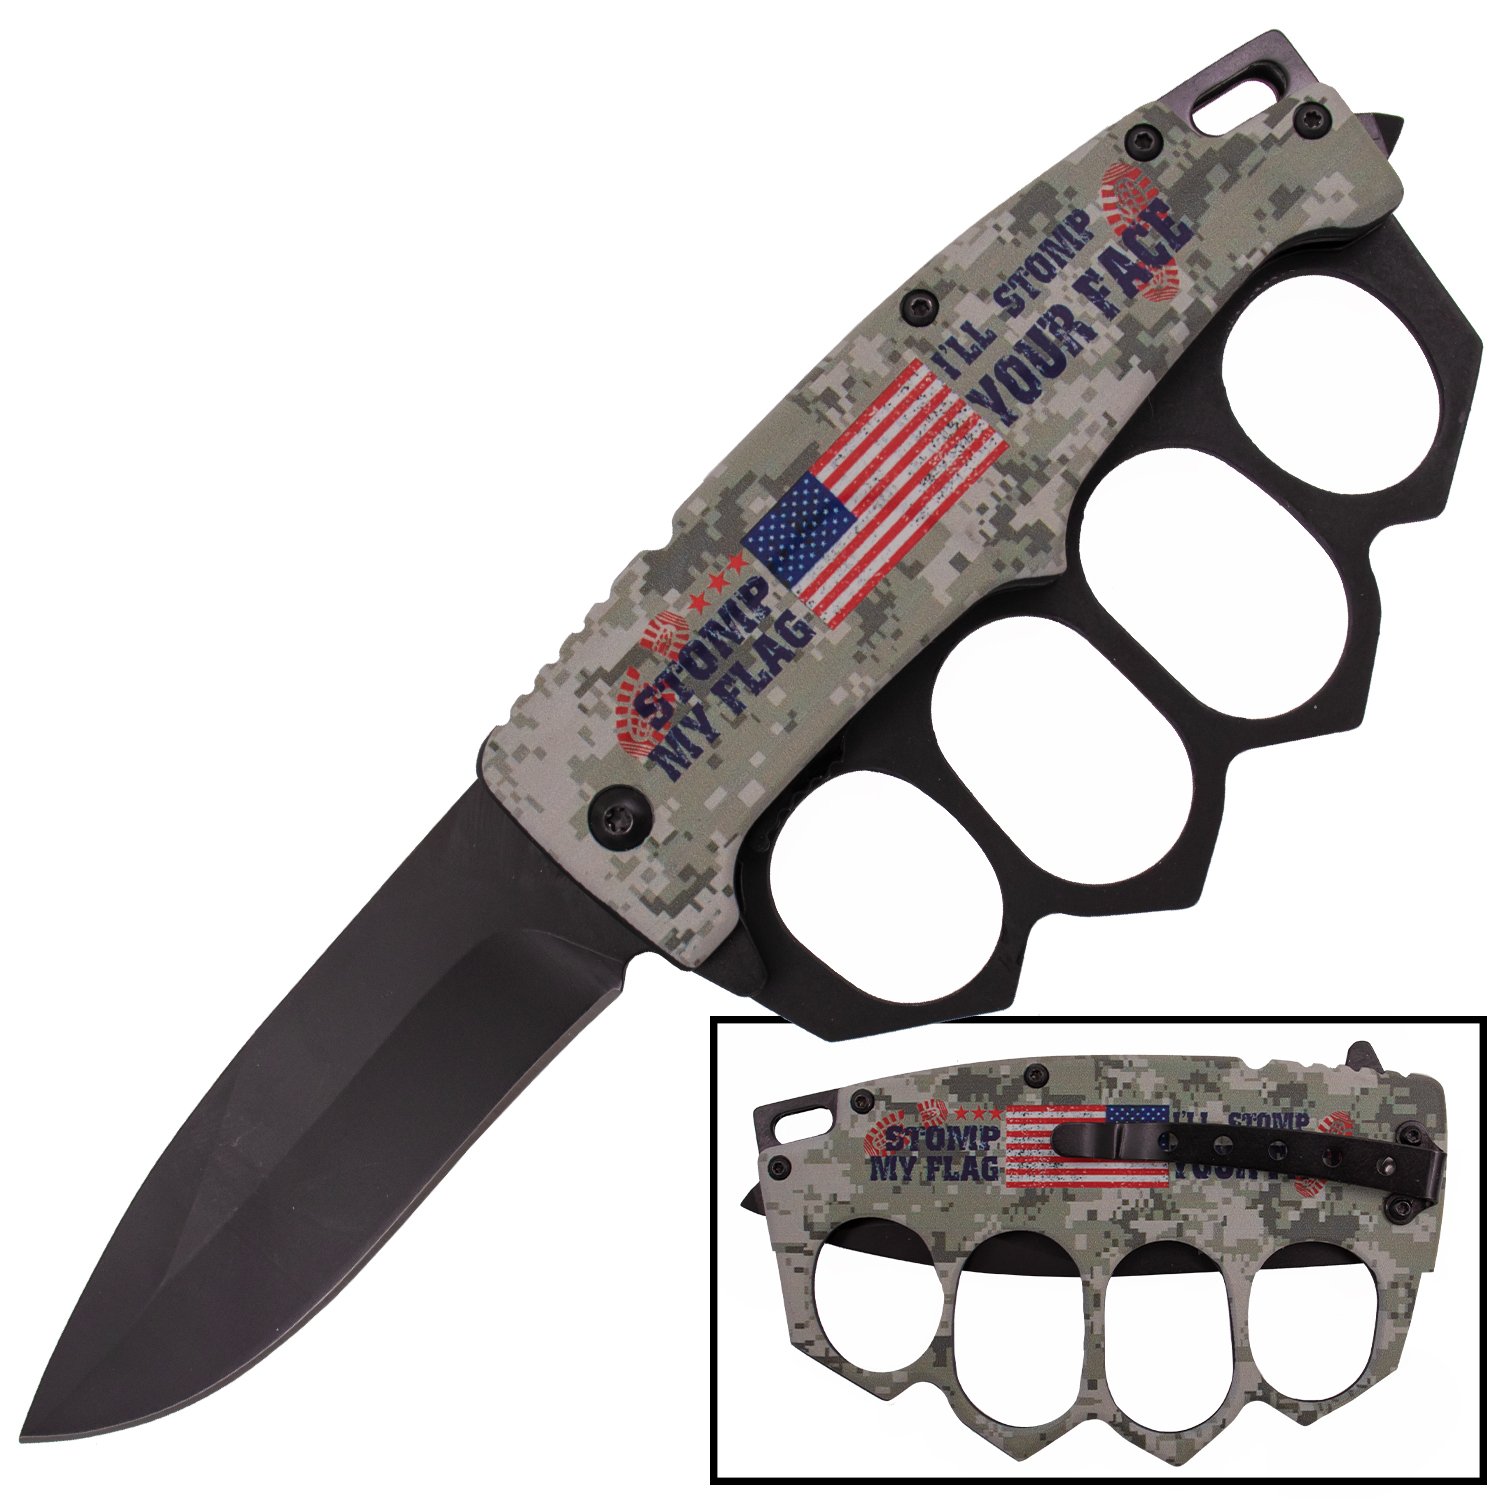 Tiger USA Spring Assisted Trench Knife   XXL Finger Holes (STOMP MY FLAG DIGI CAMO)